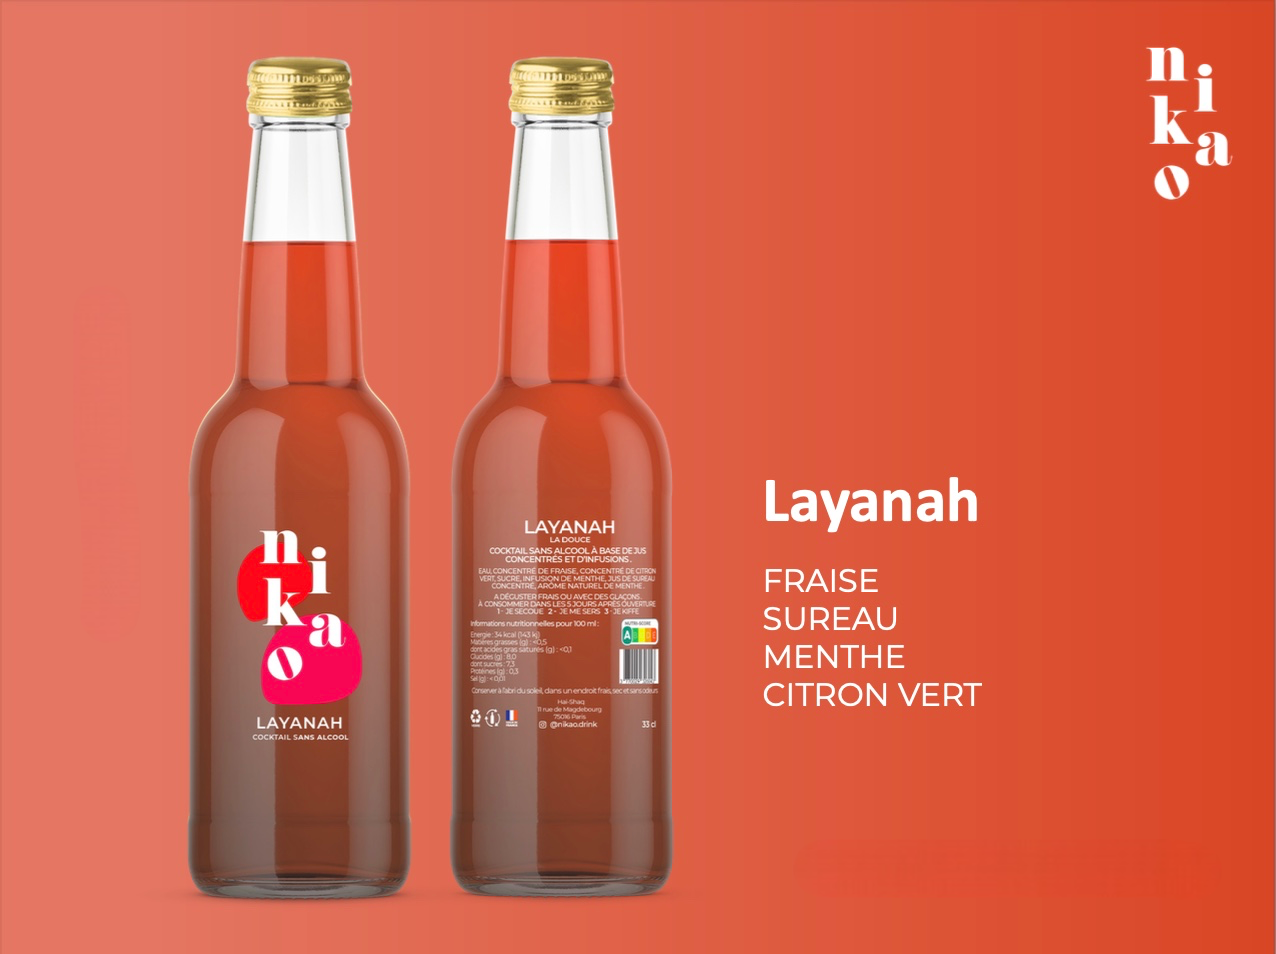 Layanah, the sweet 33cl